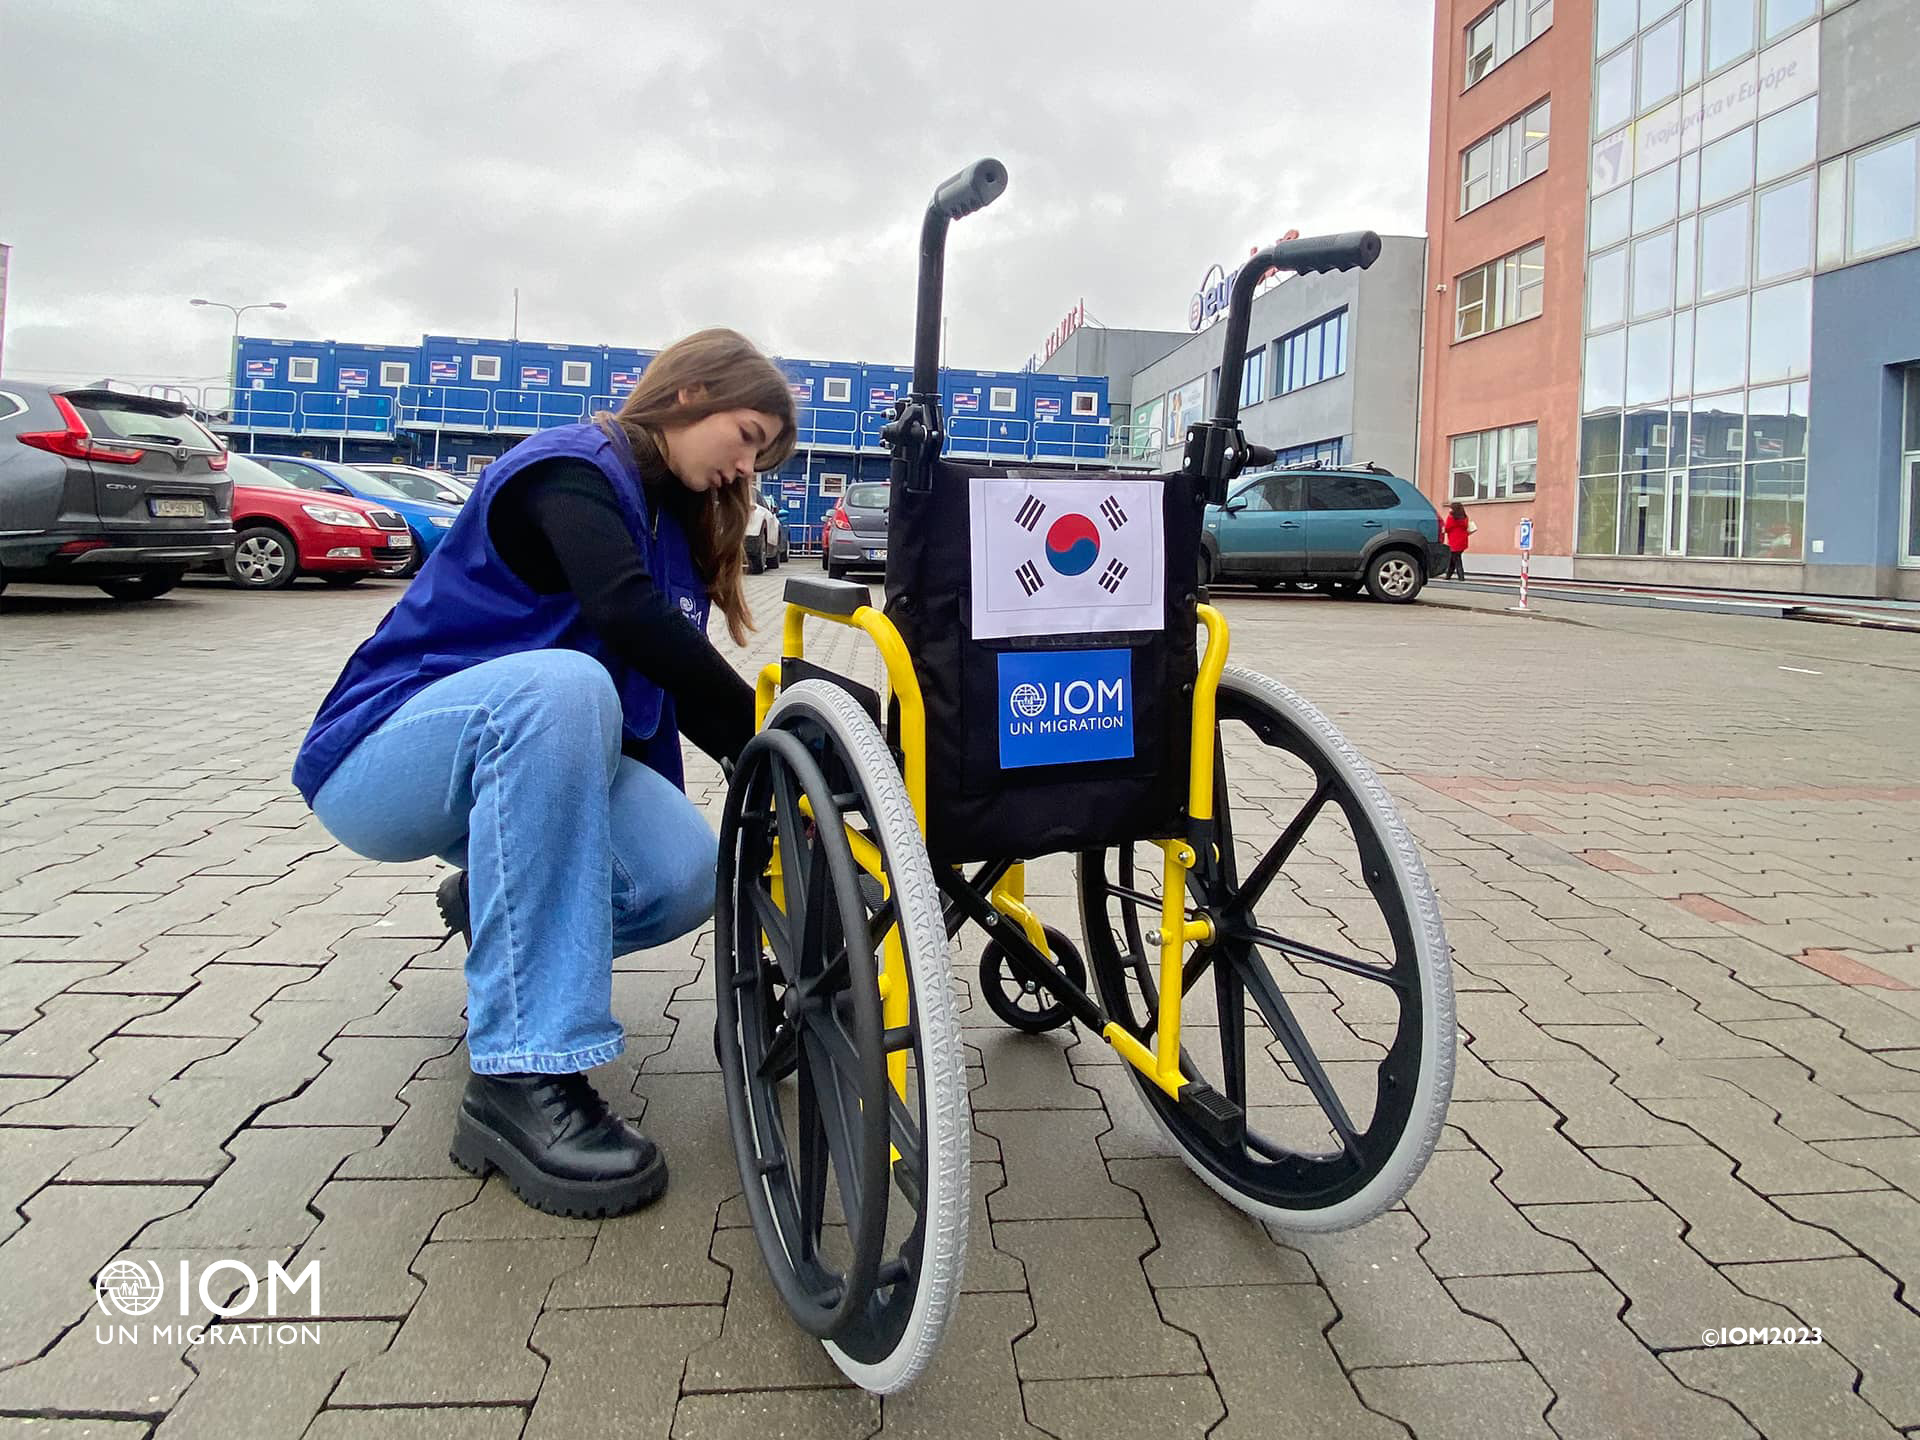 Two wheelchairs to help people with disabilities with transfer are available for assistance in the Kosice hotspot. Photo © International Organization for Migration (IOM) 2023.